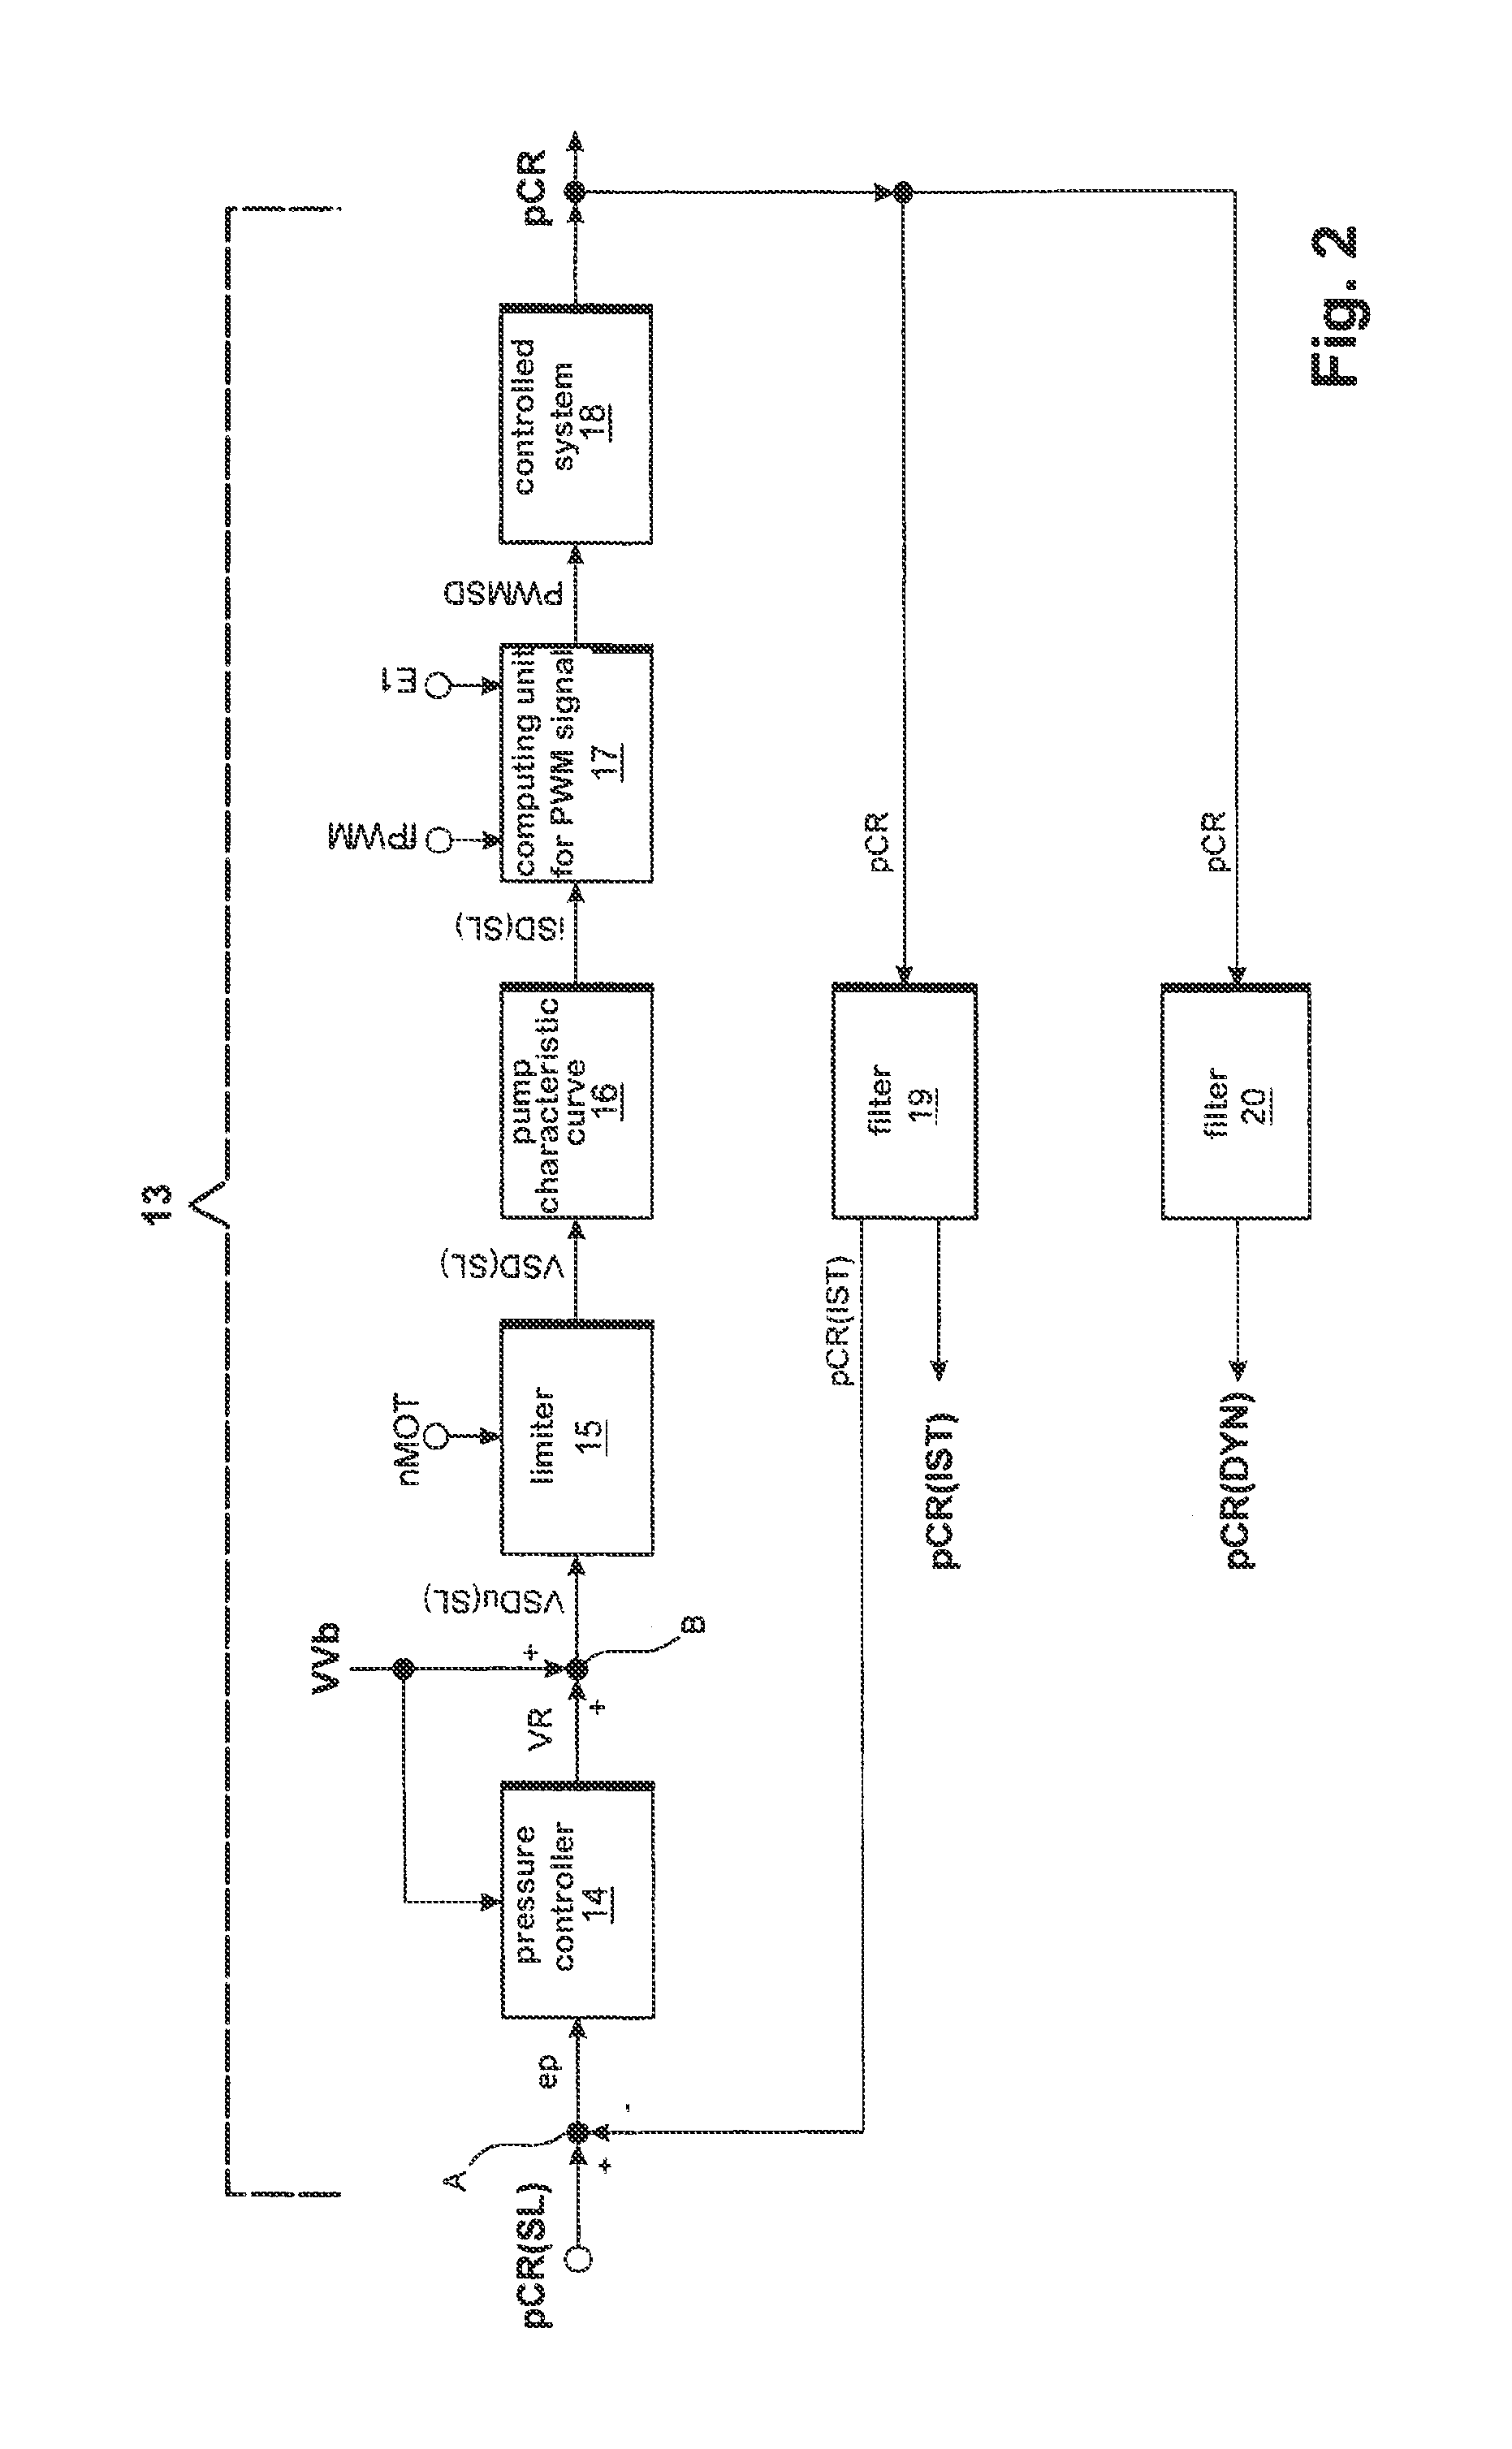 Method for regulating the rail pressure in a common rail injection system of an internal combustion engine